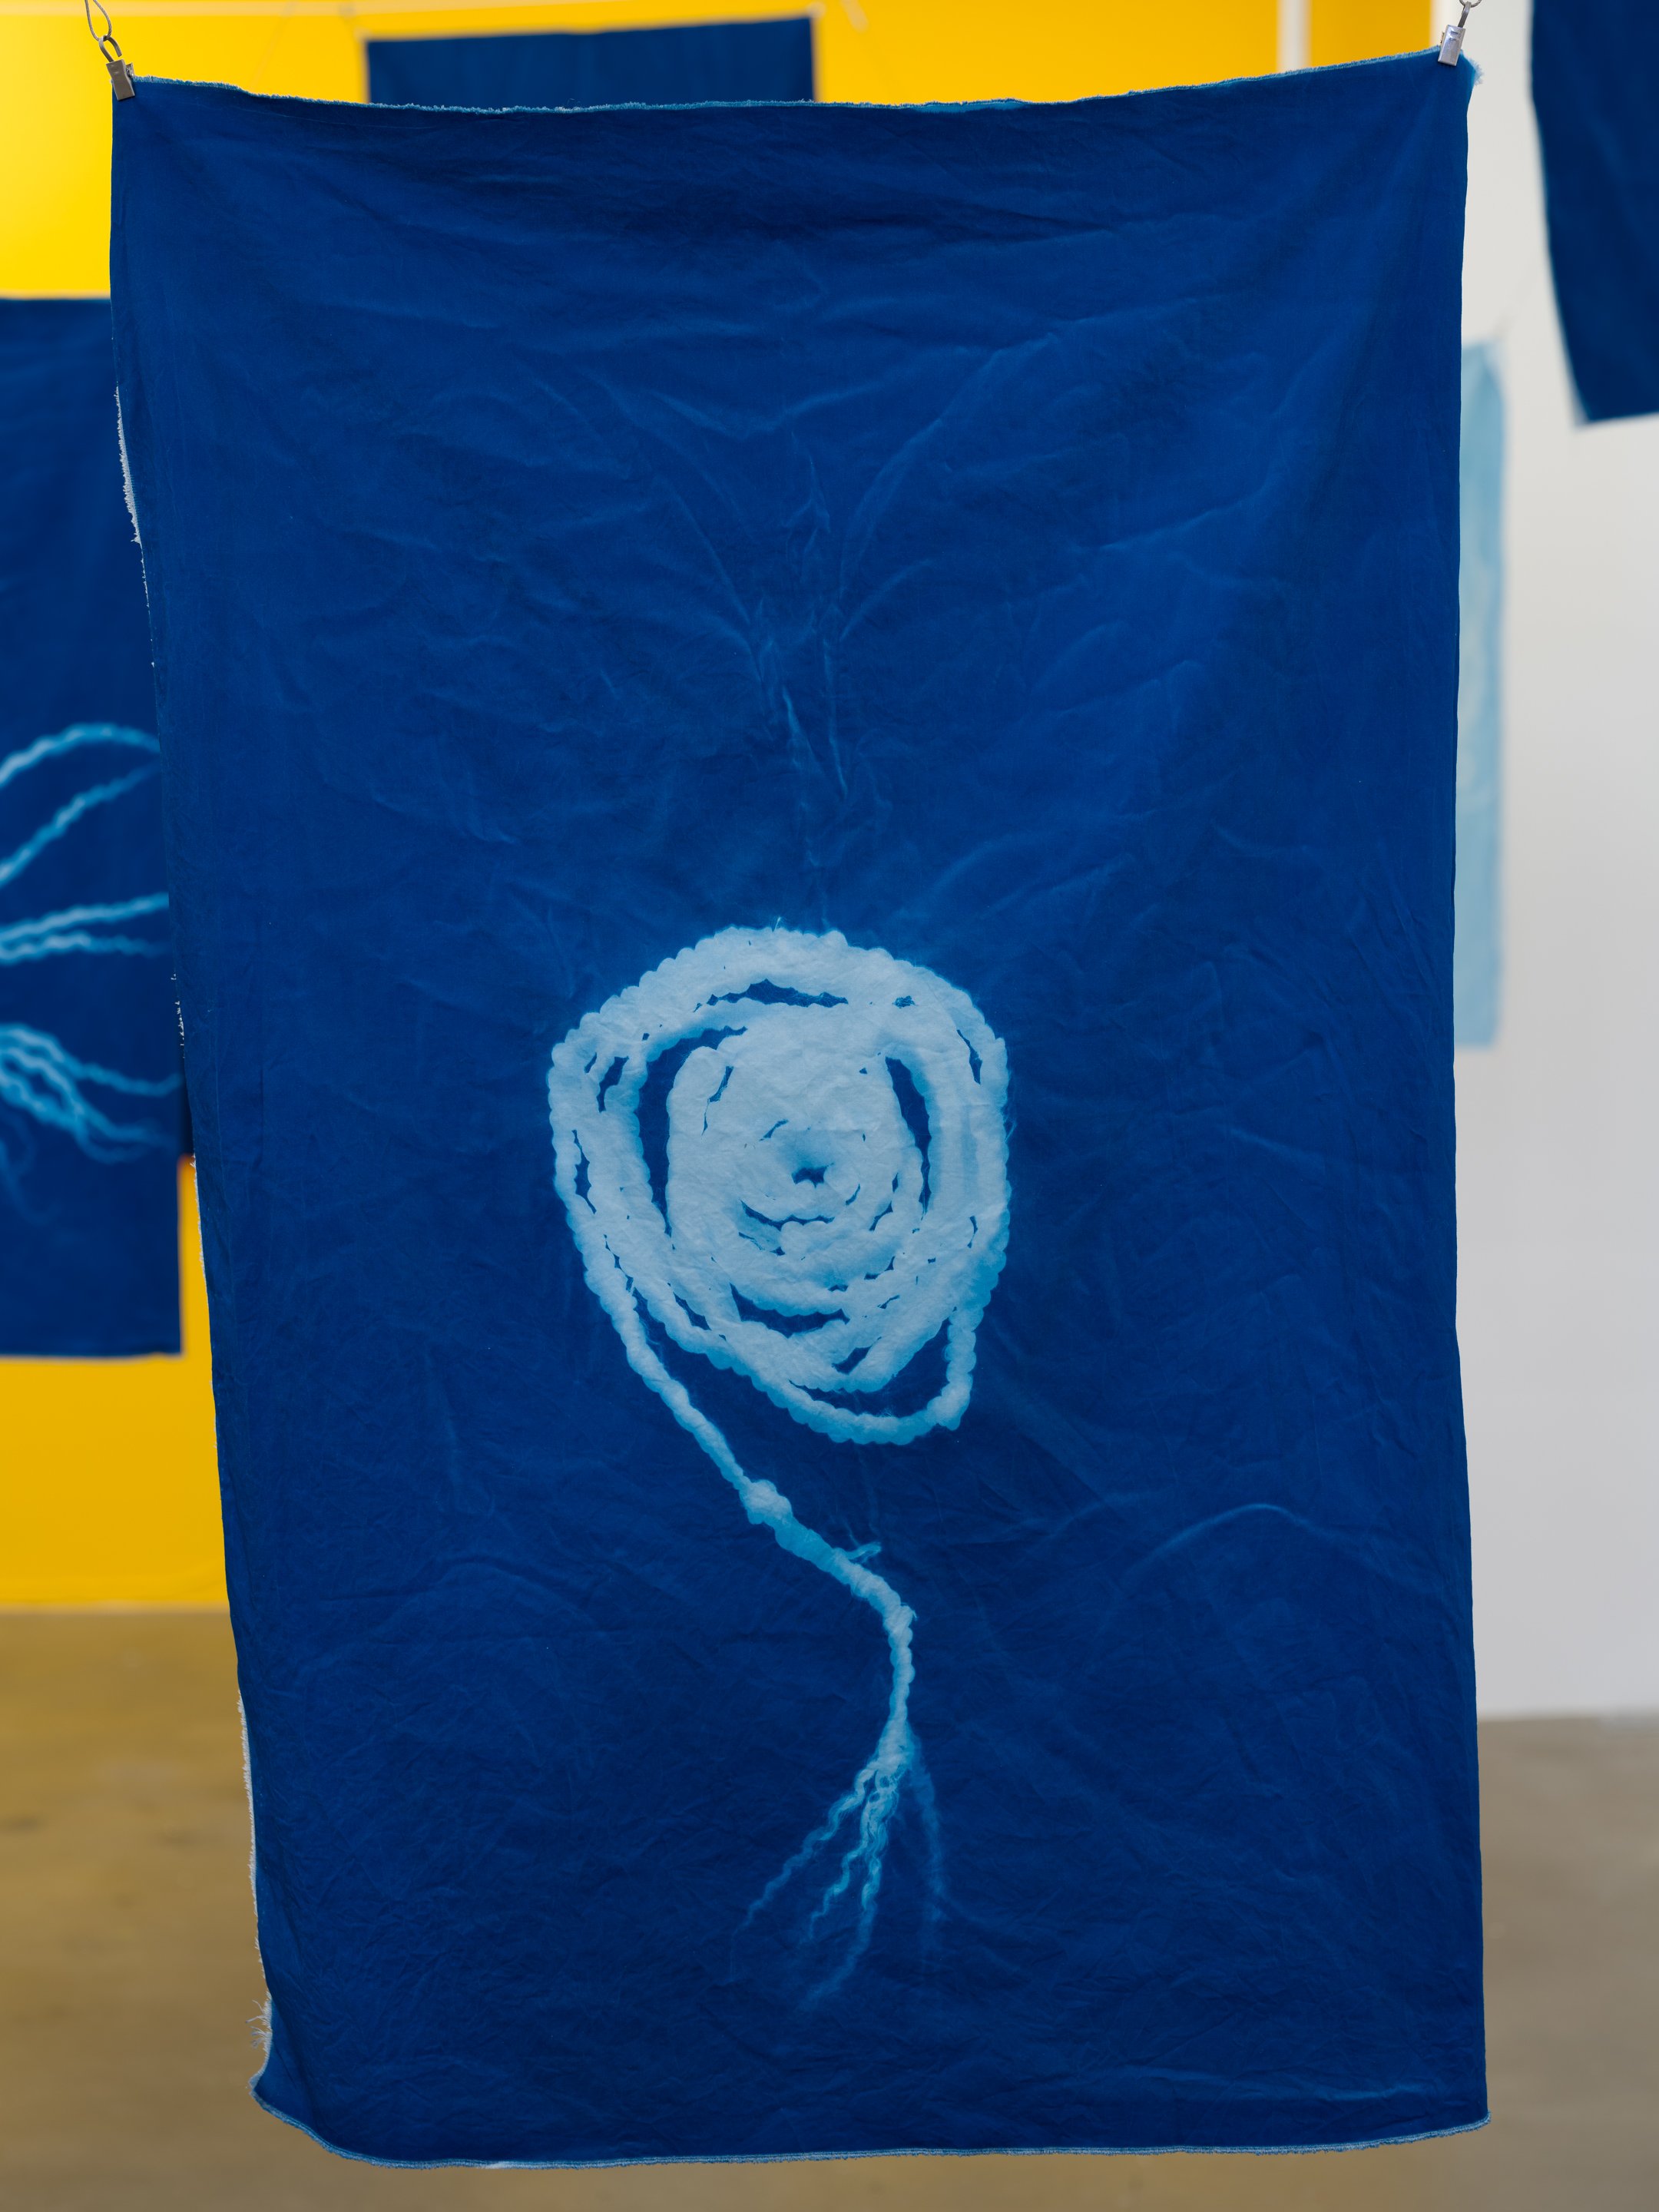 Untitled Cyanotype (braided coil)